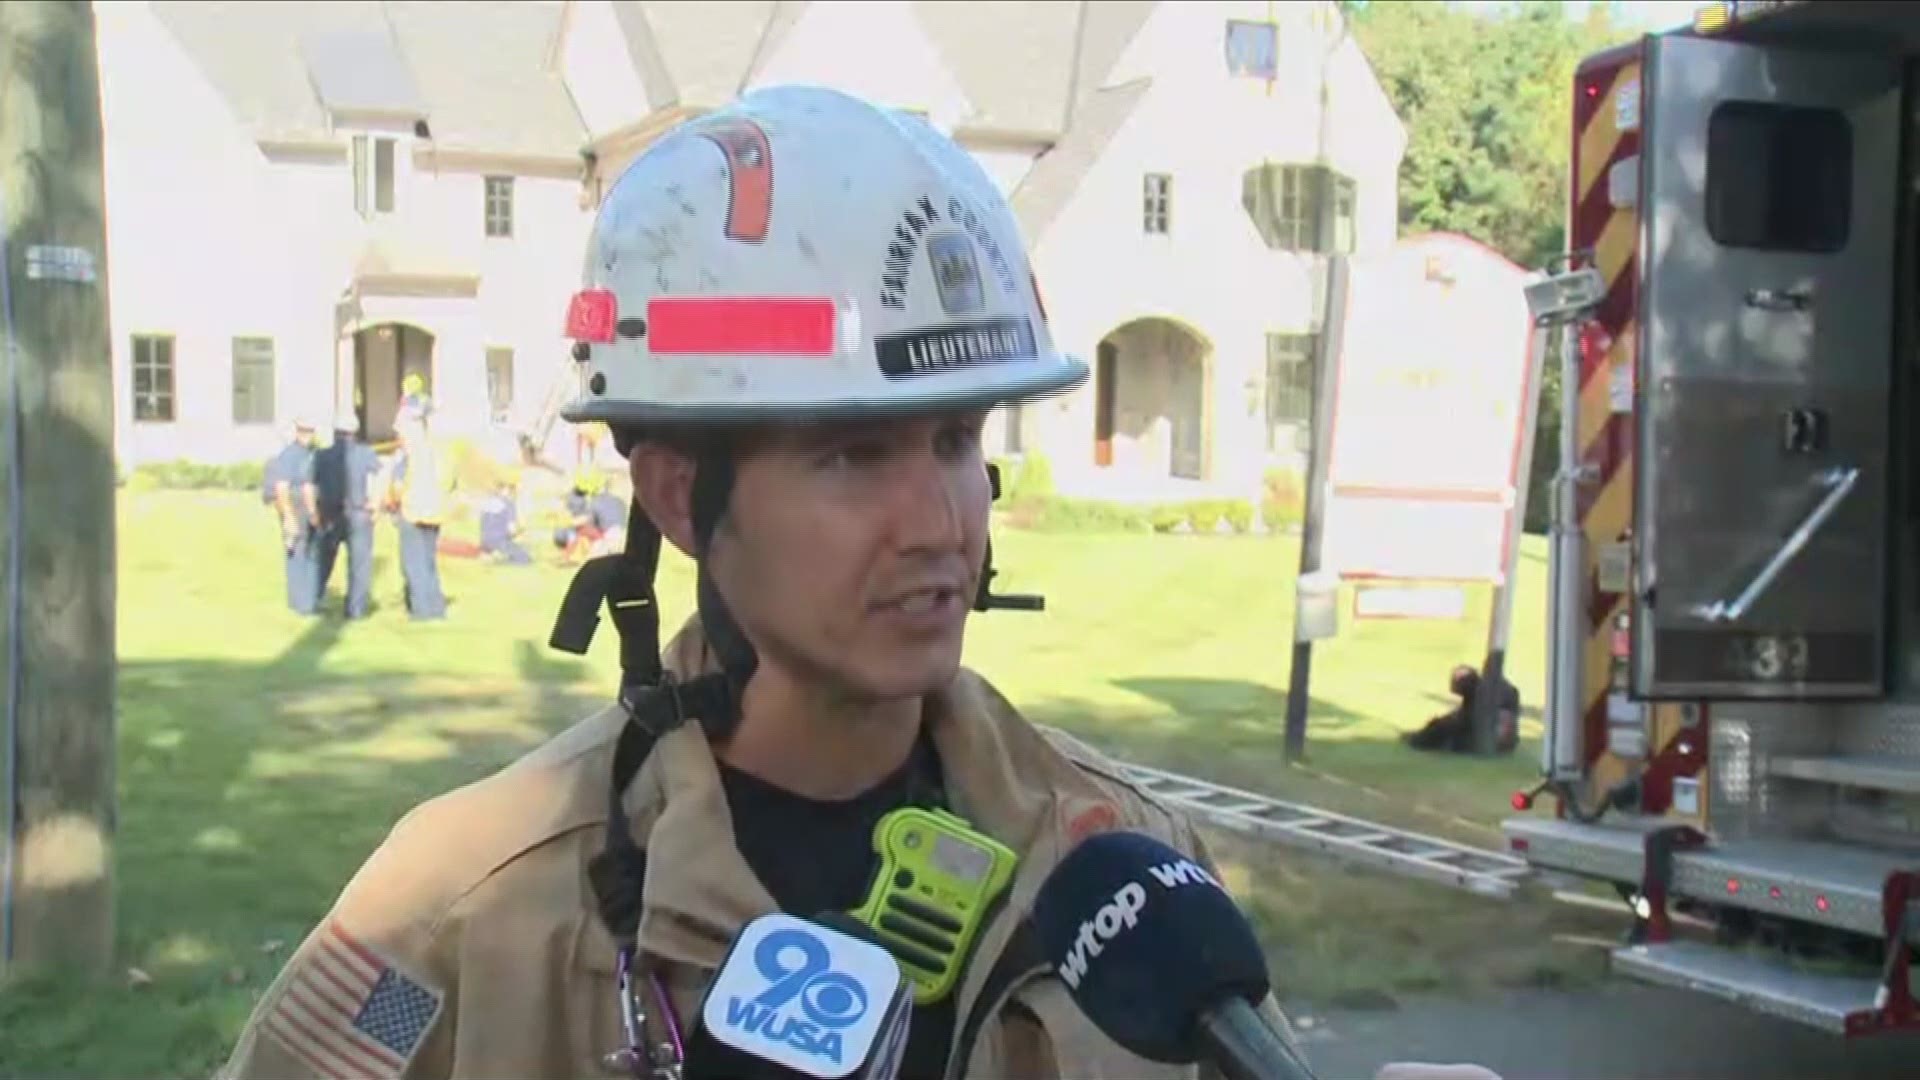 Fairfax County fire crews rescued a person from a trench on Wednesday morning.